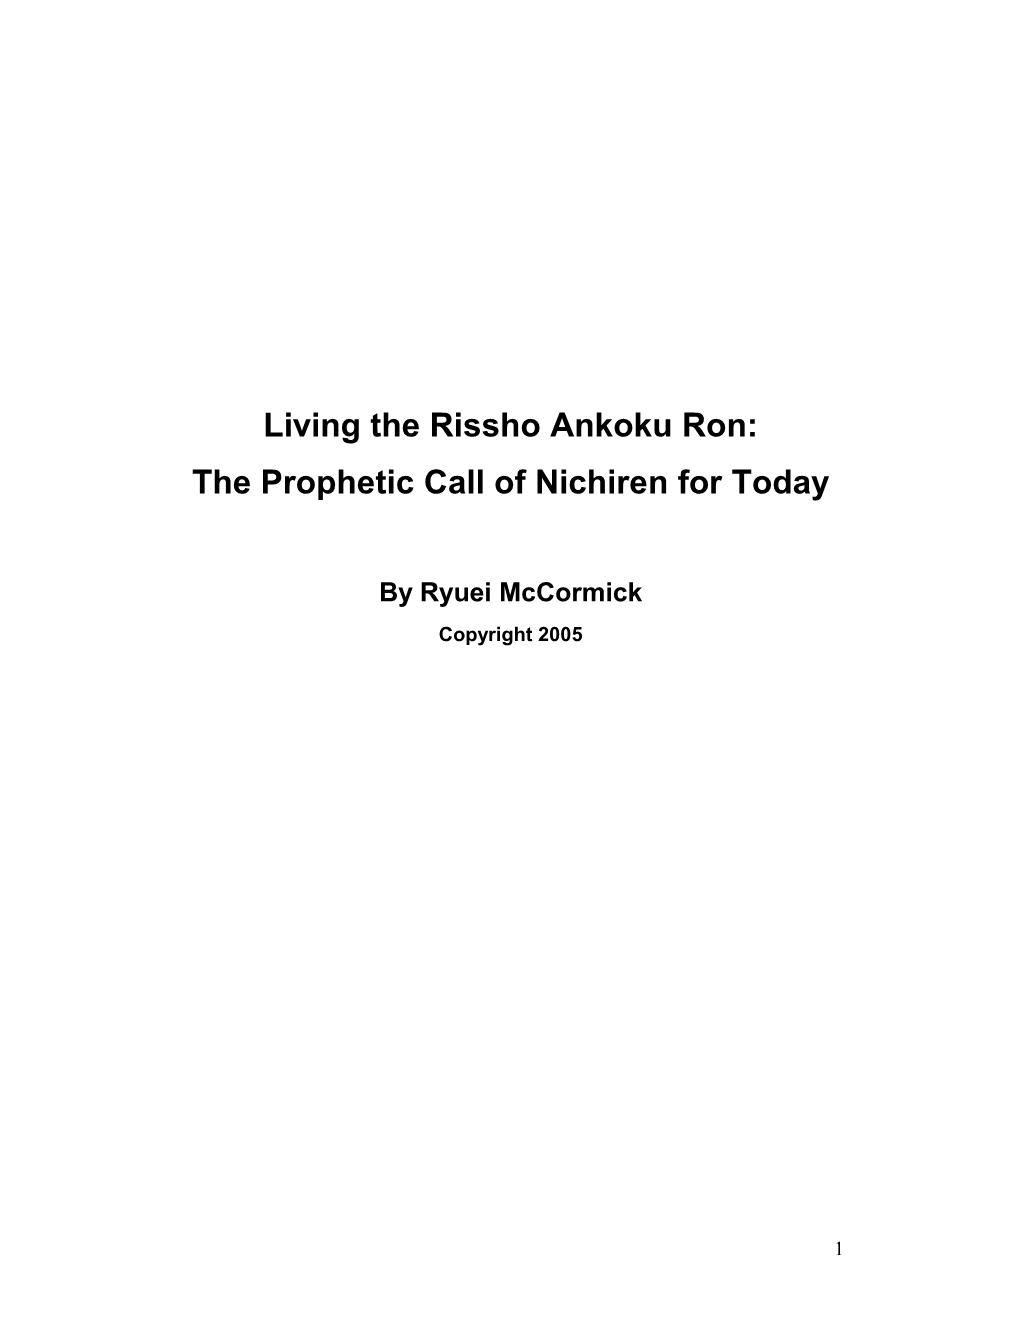 Living the Rissho Ankoku Ron: the Prophetic Call of Nichiren for Today